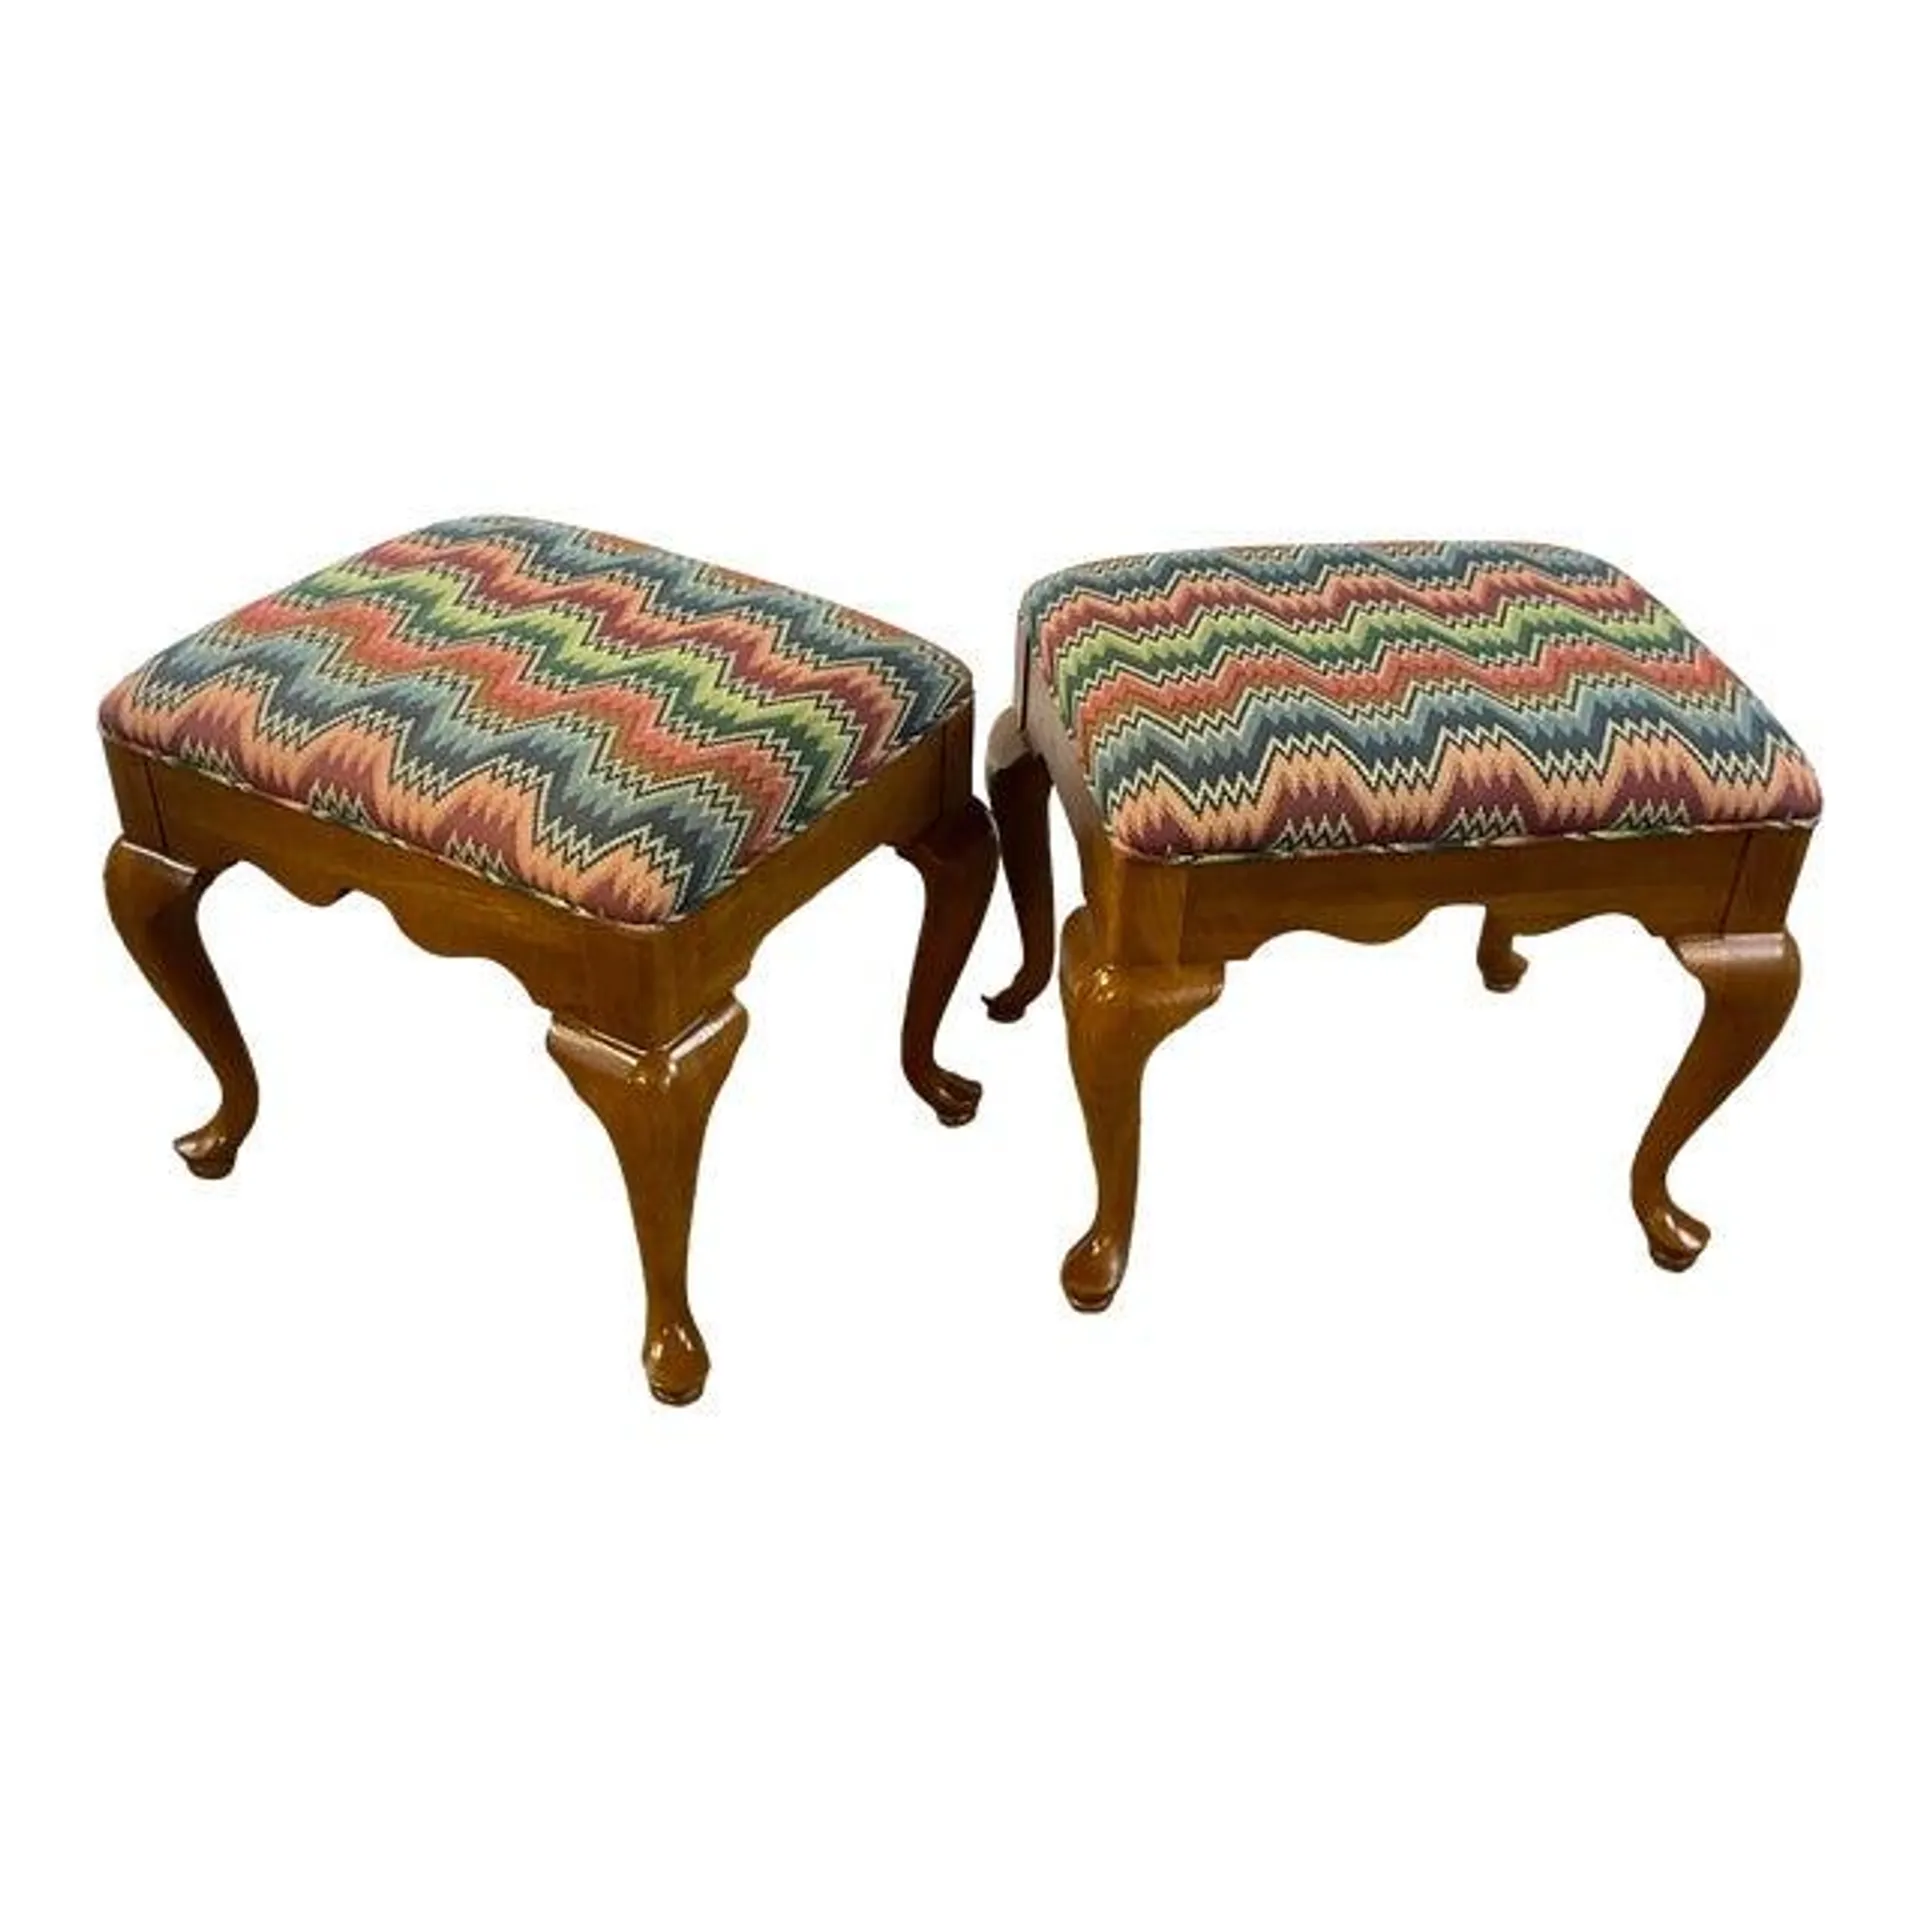 1980s Vintage Arts & Crafts Queen Anne Thomasville Maple Stool Bench in Flame Stitch Upholstery - a Pair